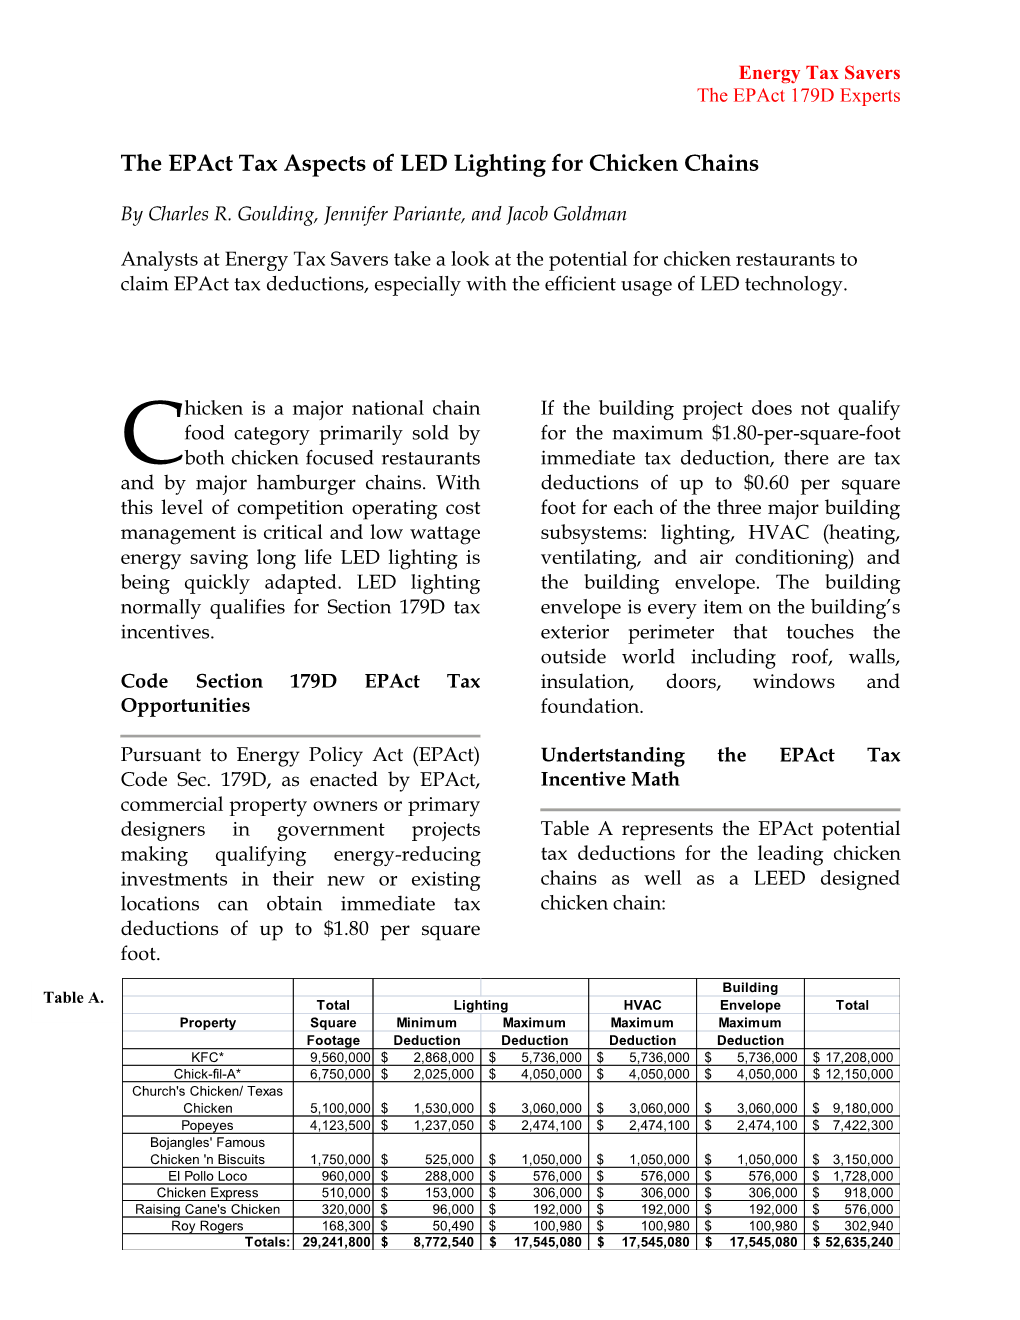 The Epact Tax Aspects of LED Lighting for Chicken Chains